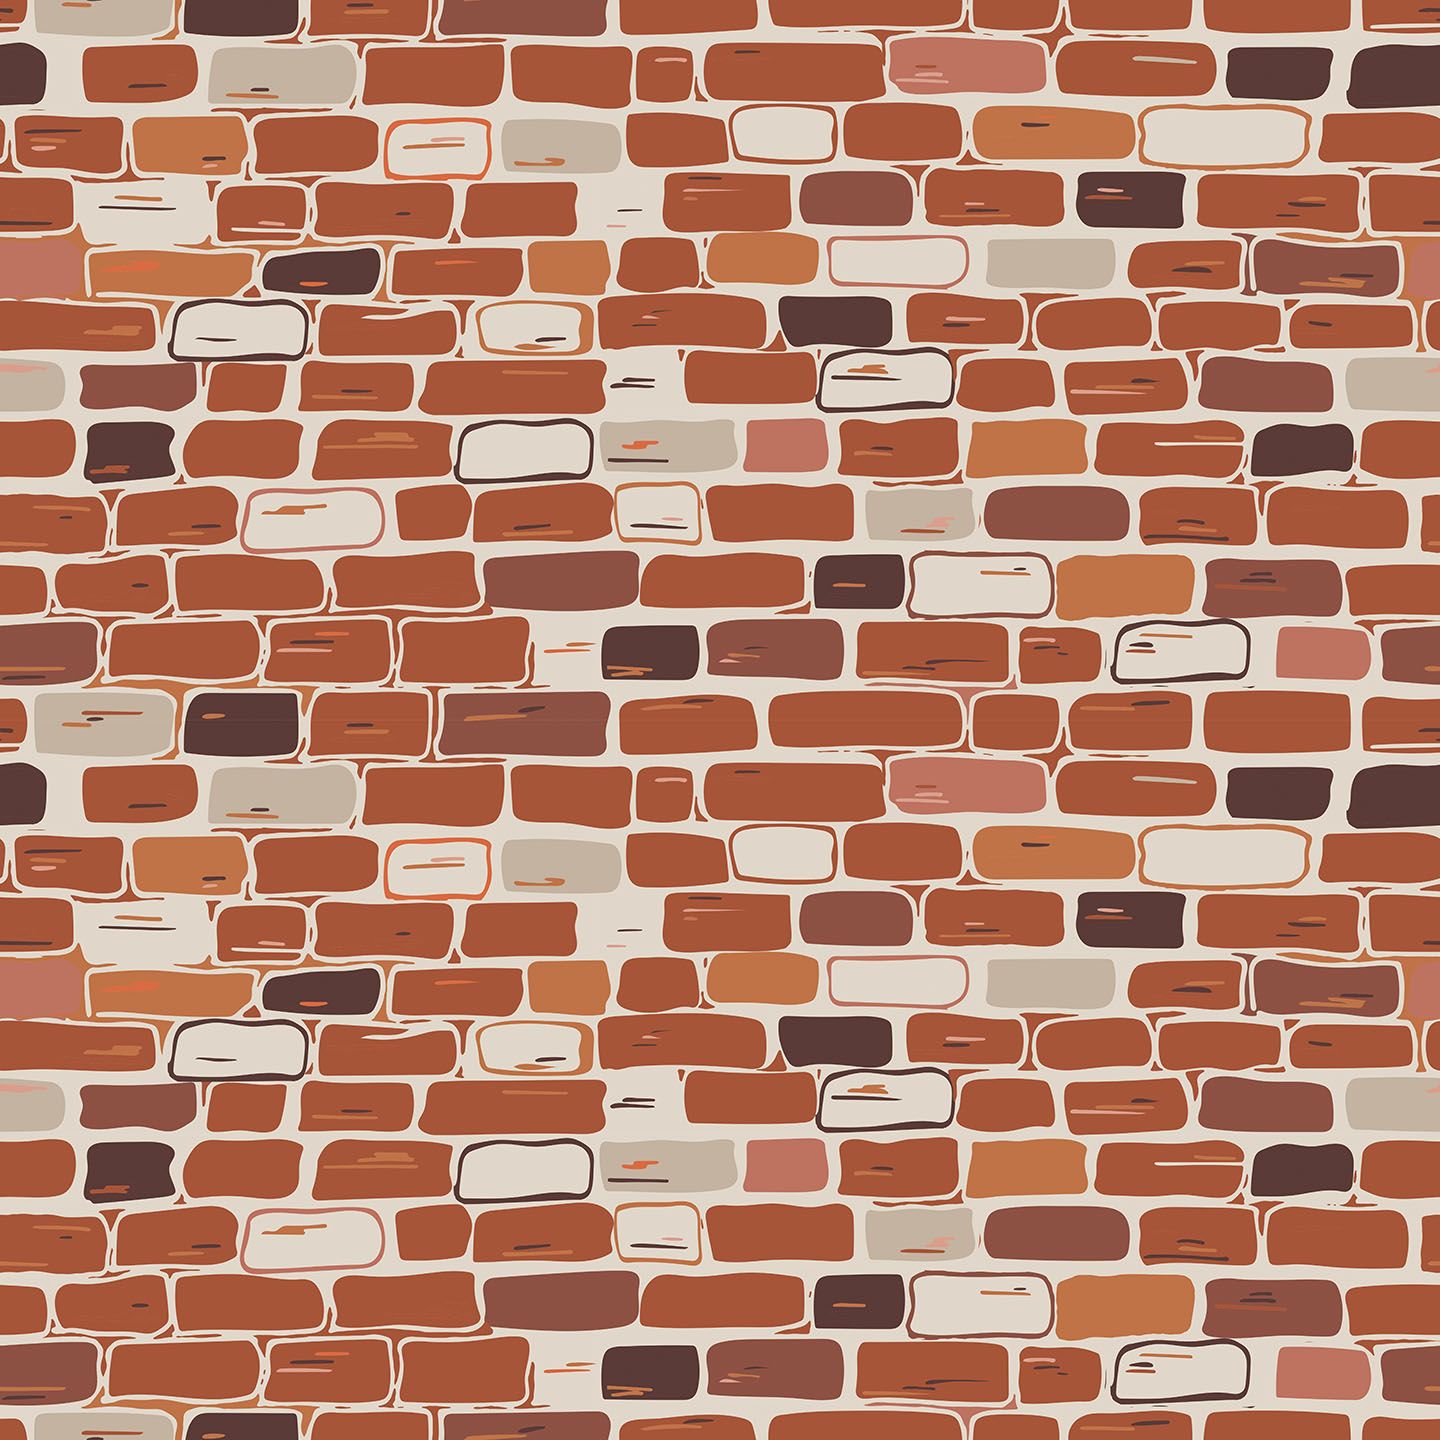 A brick wall pattern in a variety of shades of brown - Terracotta